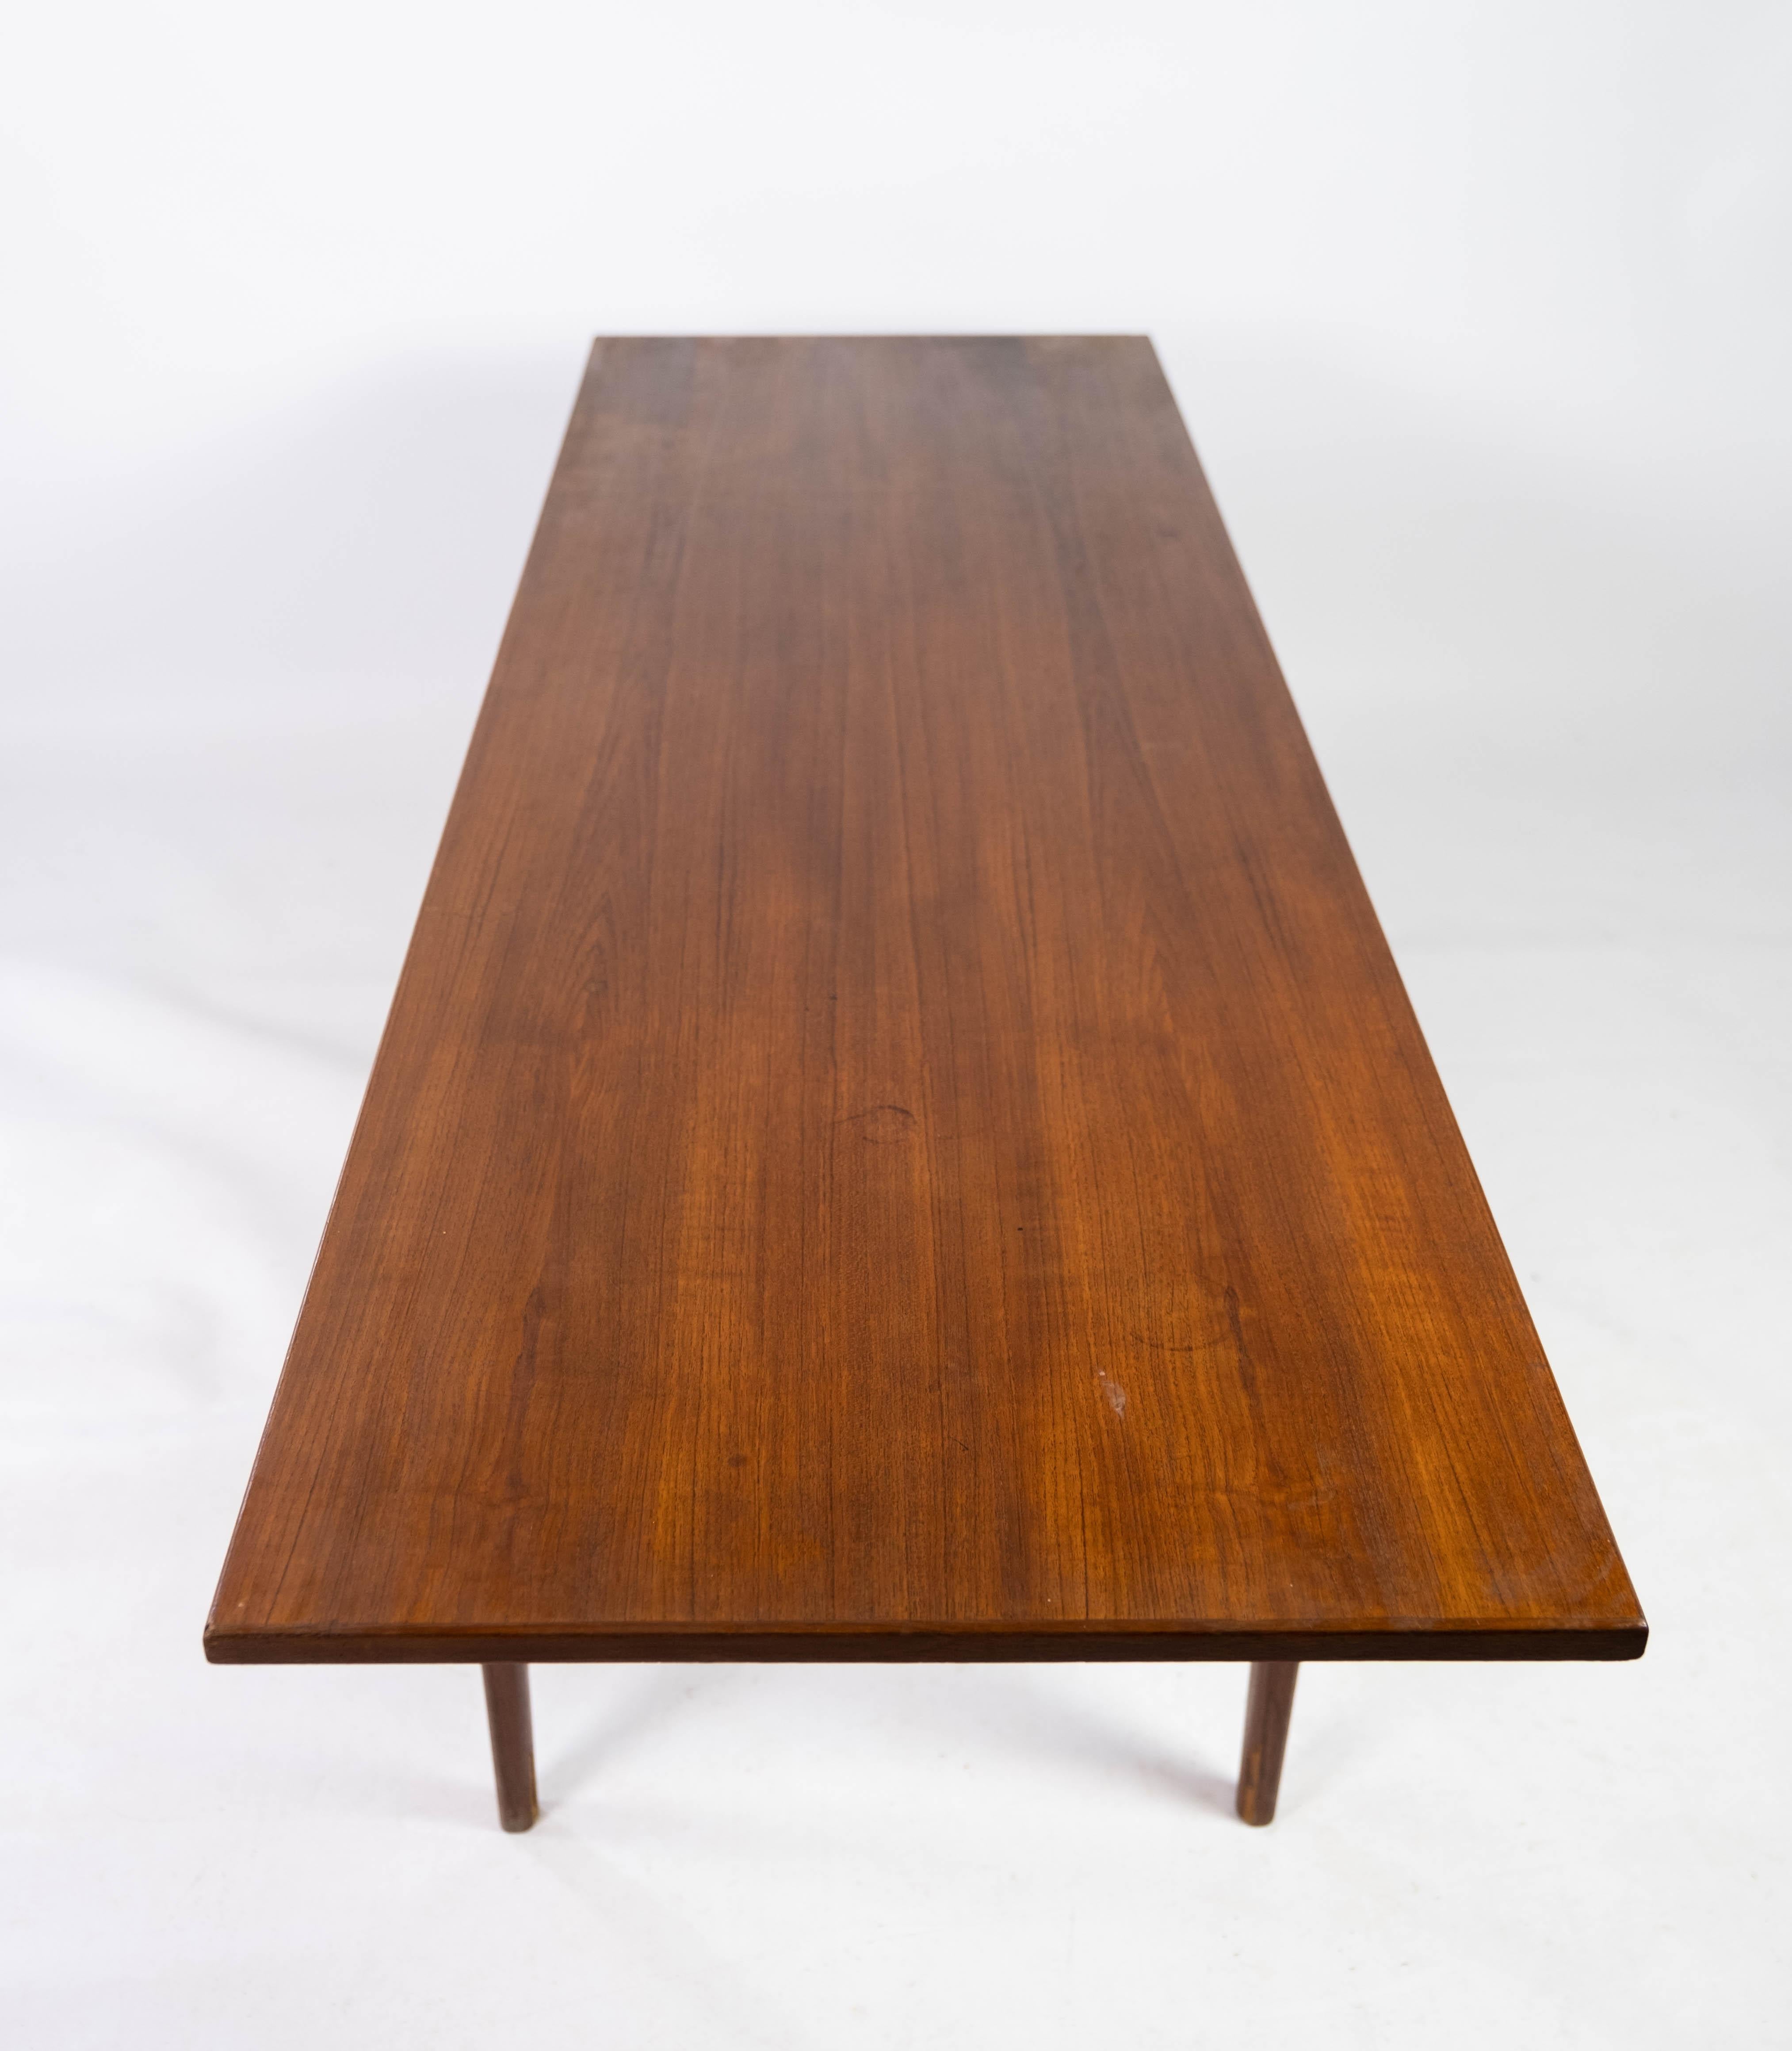 Coffee Table Made In Teak With Shelf, Danish Design From 1960s For Sale 7